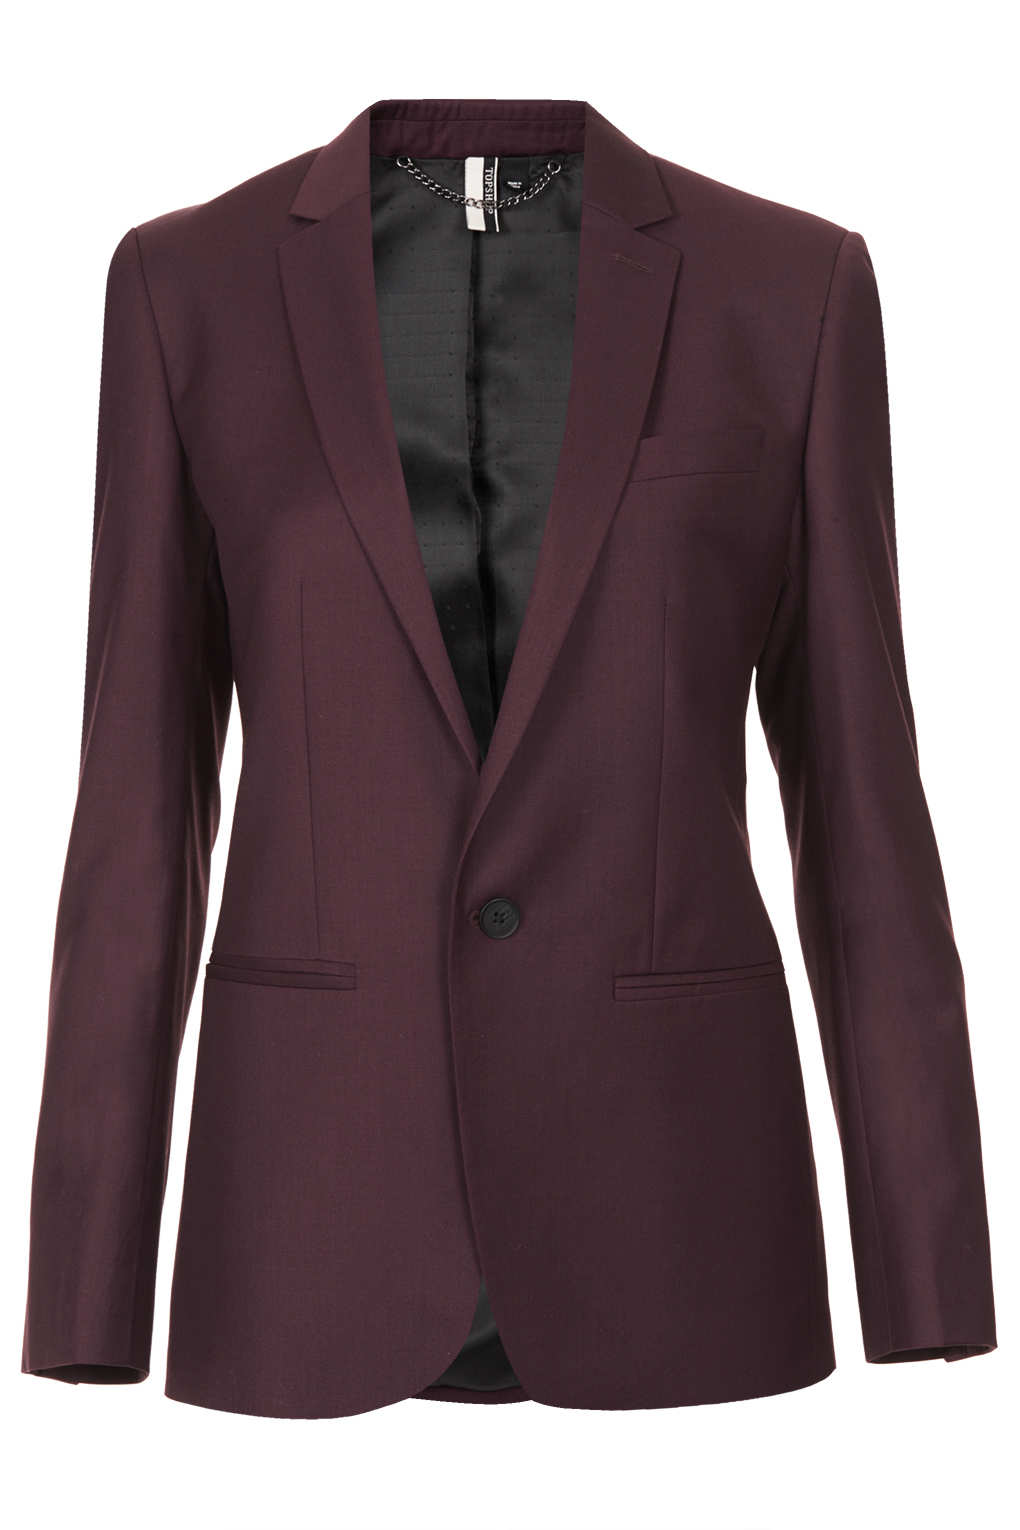 Lyst - Topshop Modern Tailoring Tailored Suit Blazer in Red